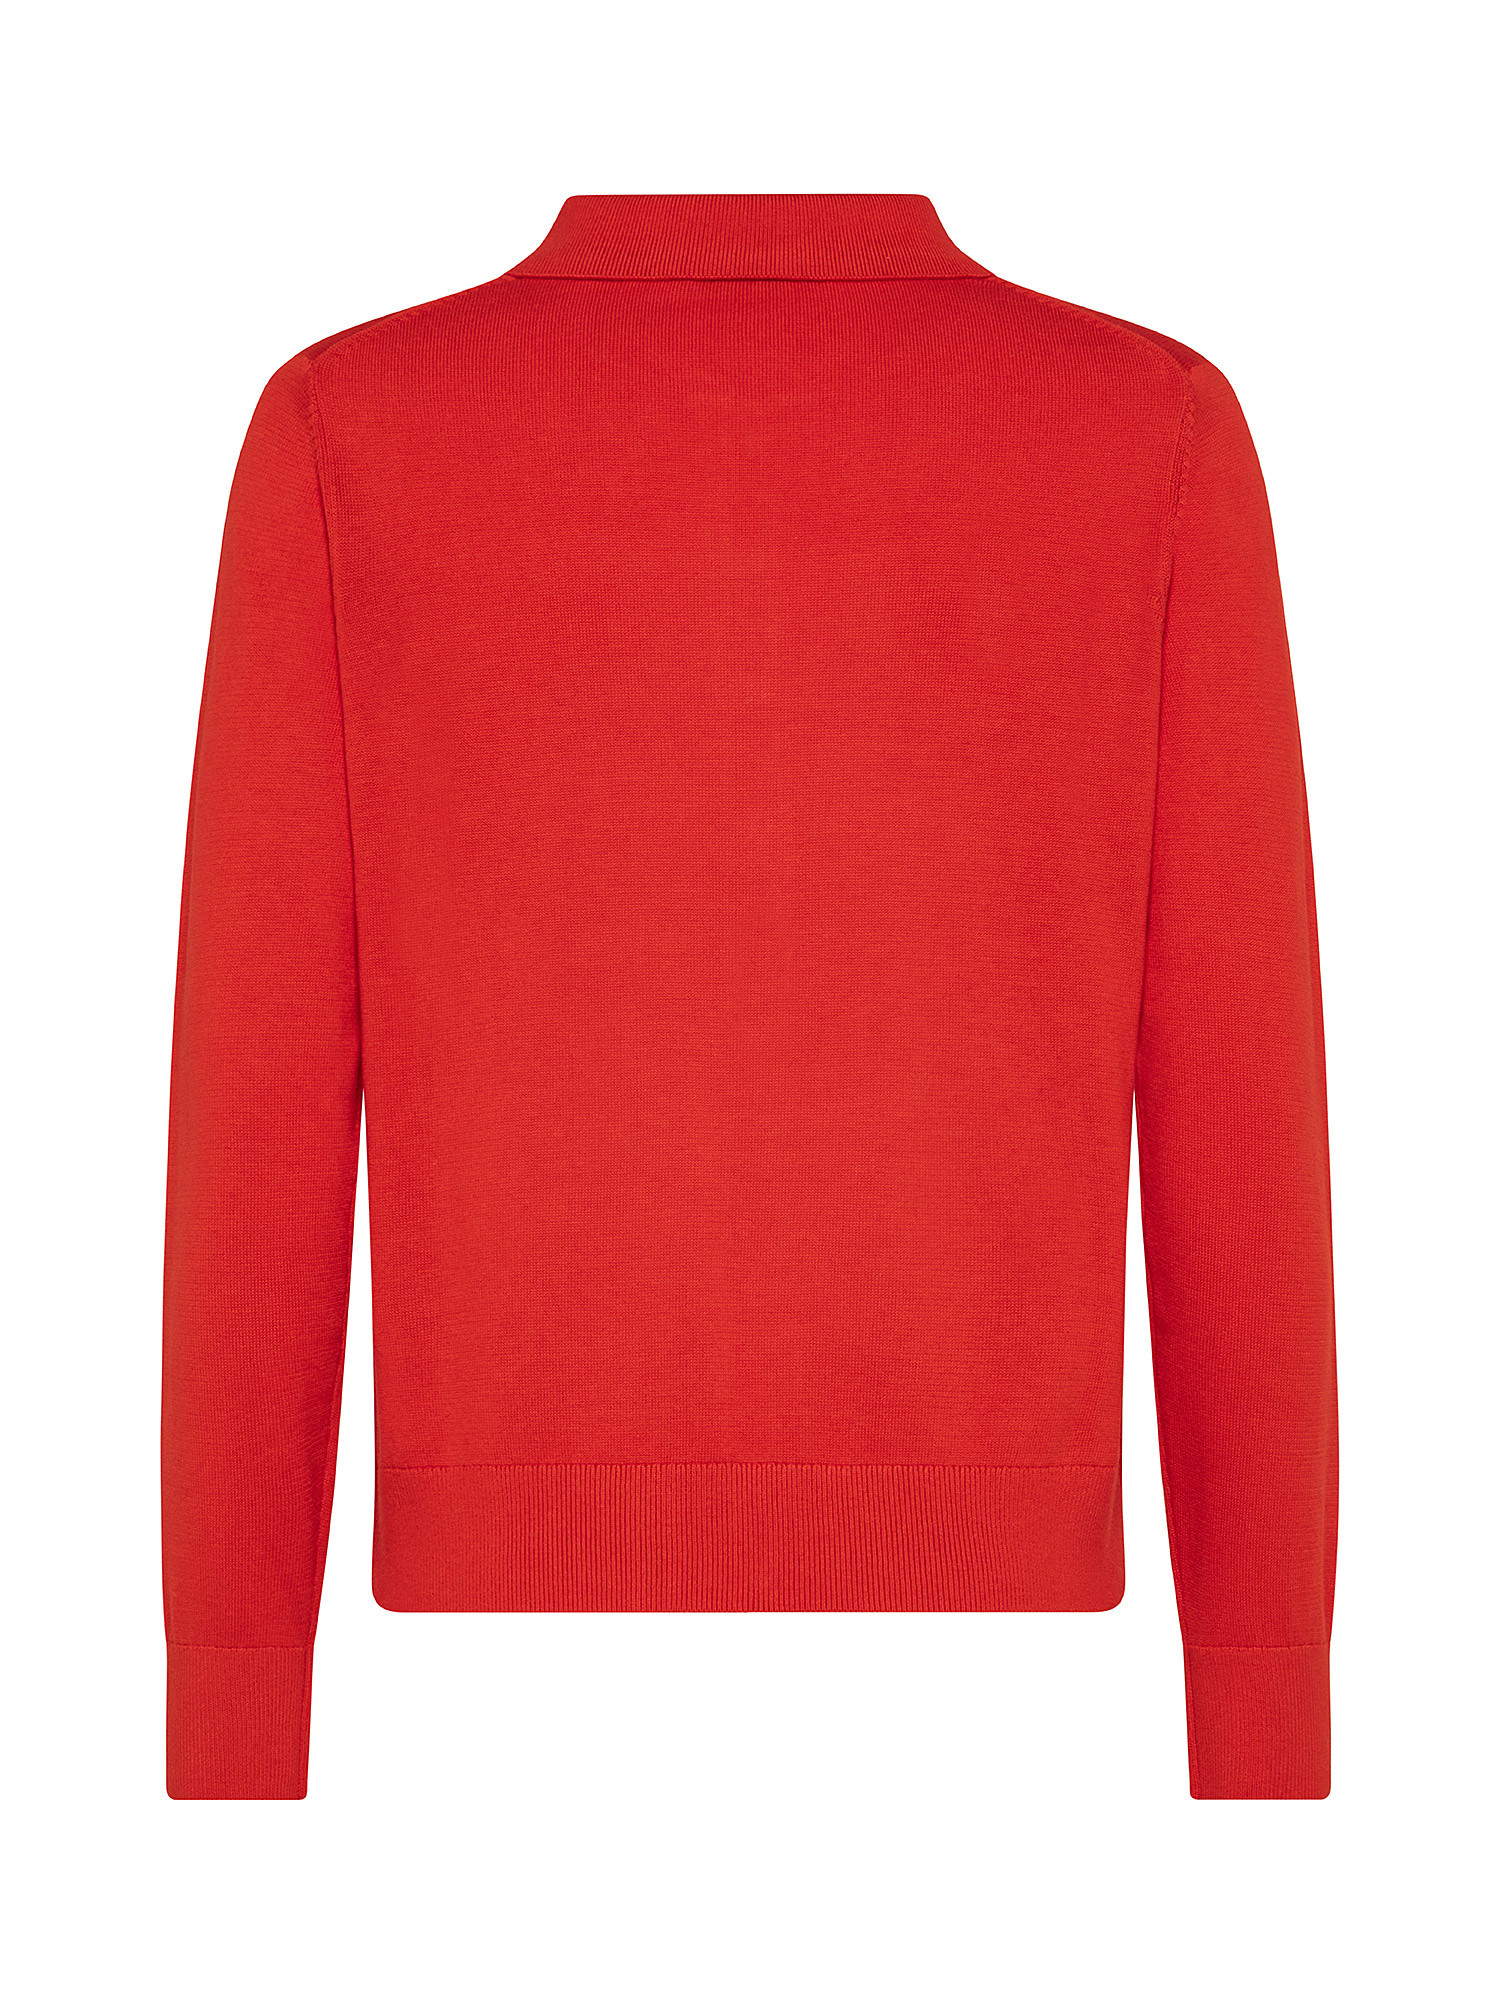 Pullover with polo collar, Red, large image number 1